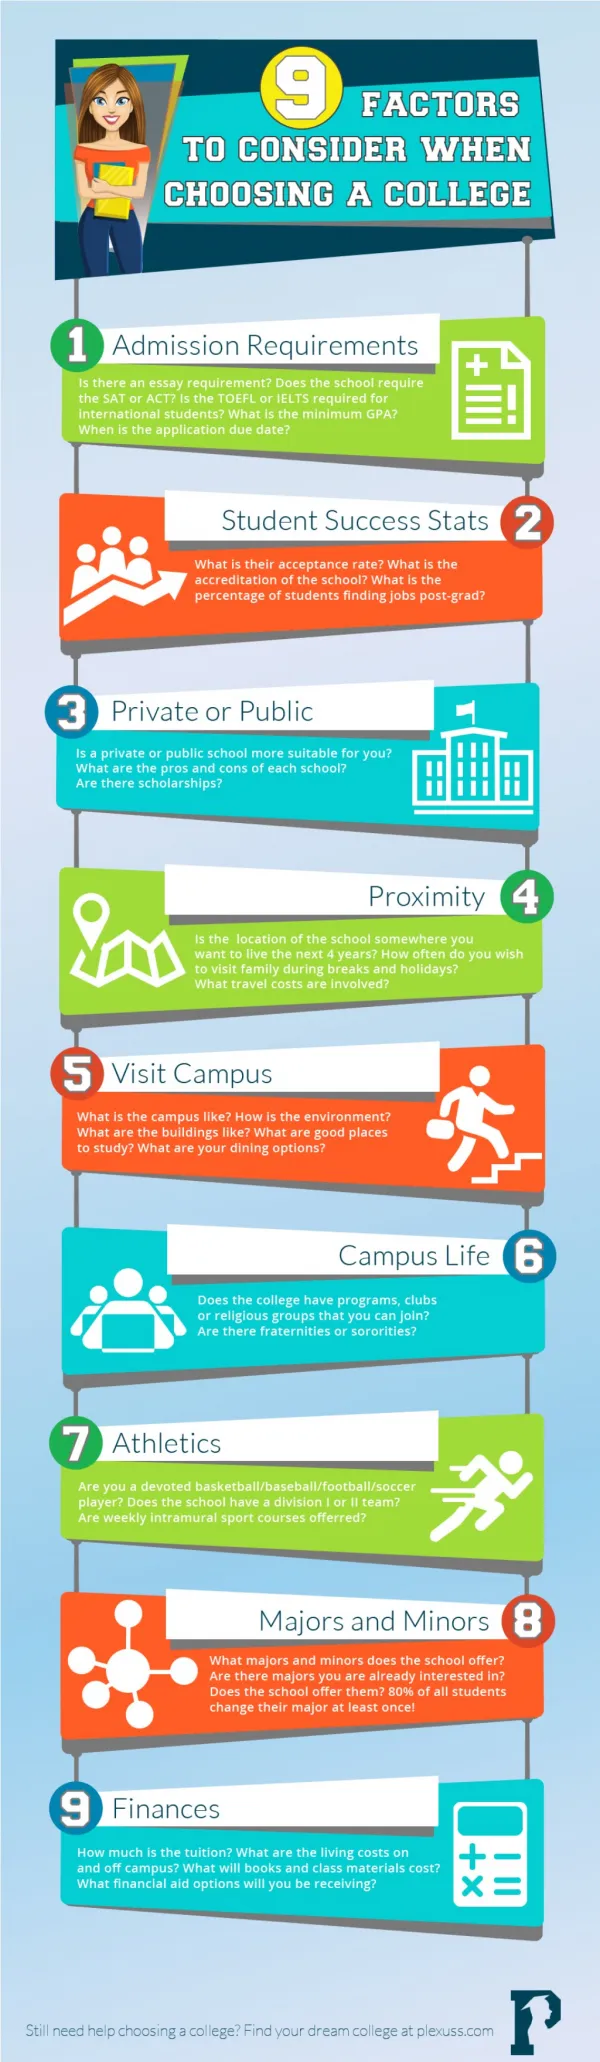 9 Factors to Consider in Choosing a College